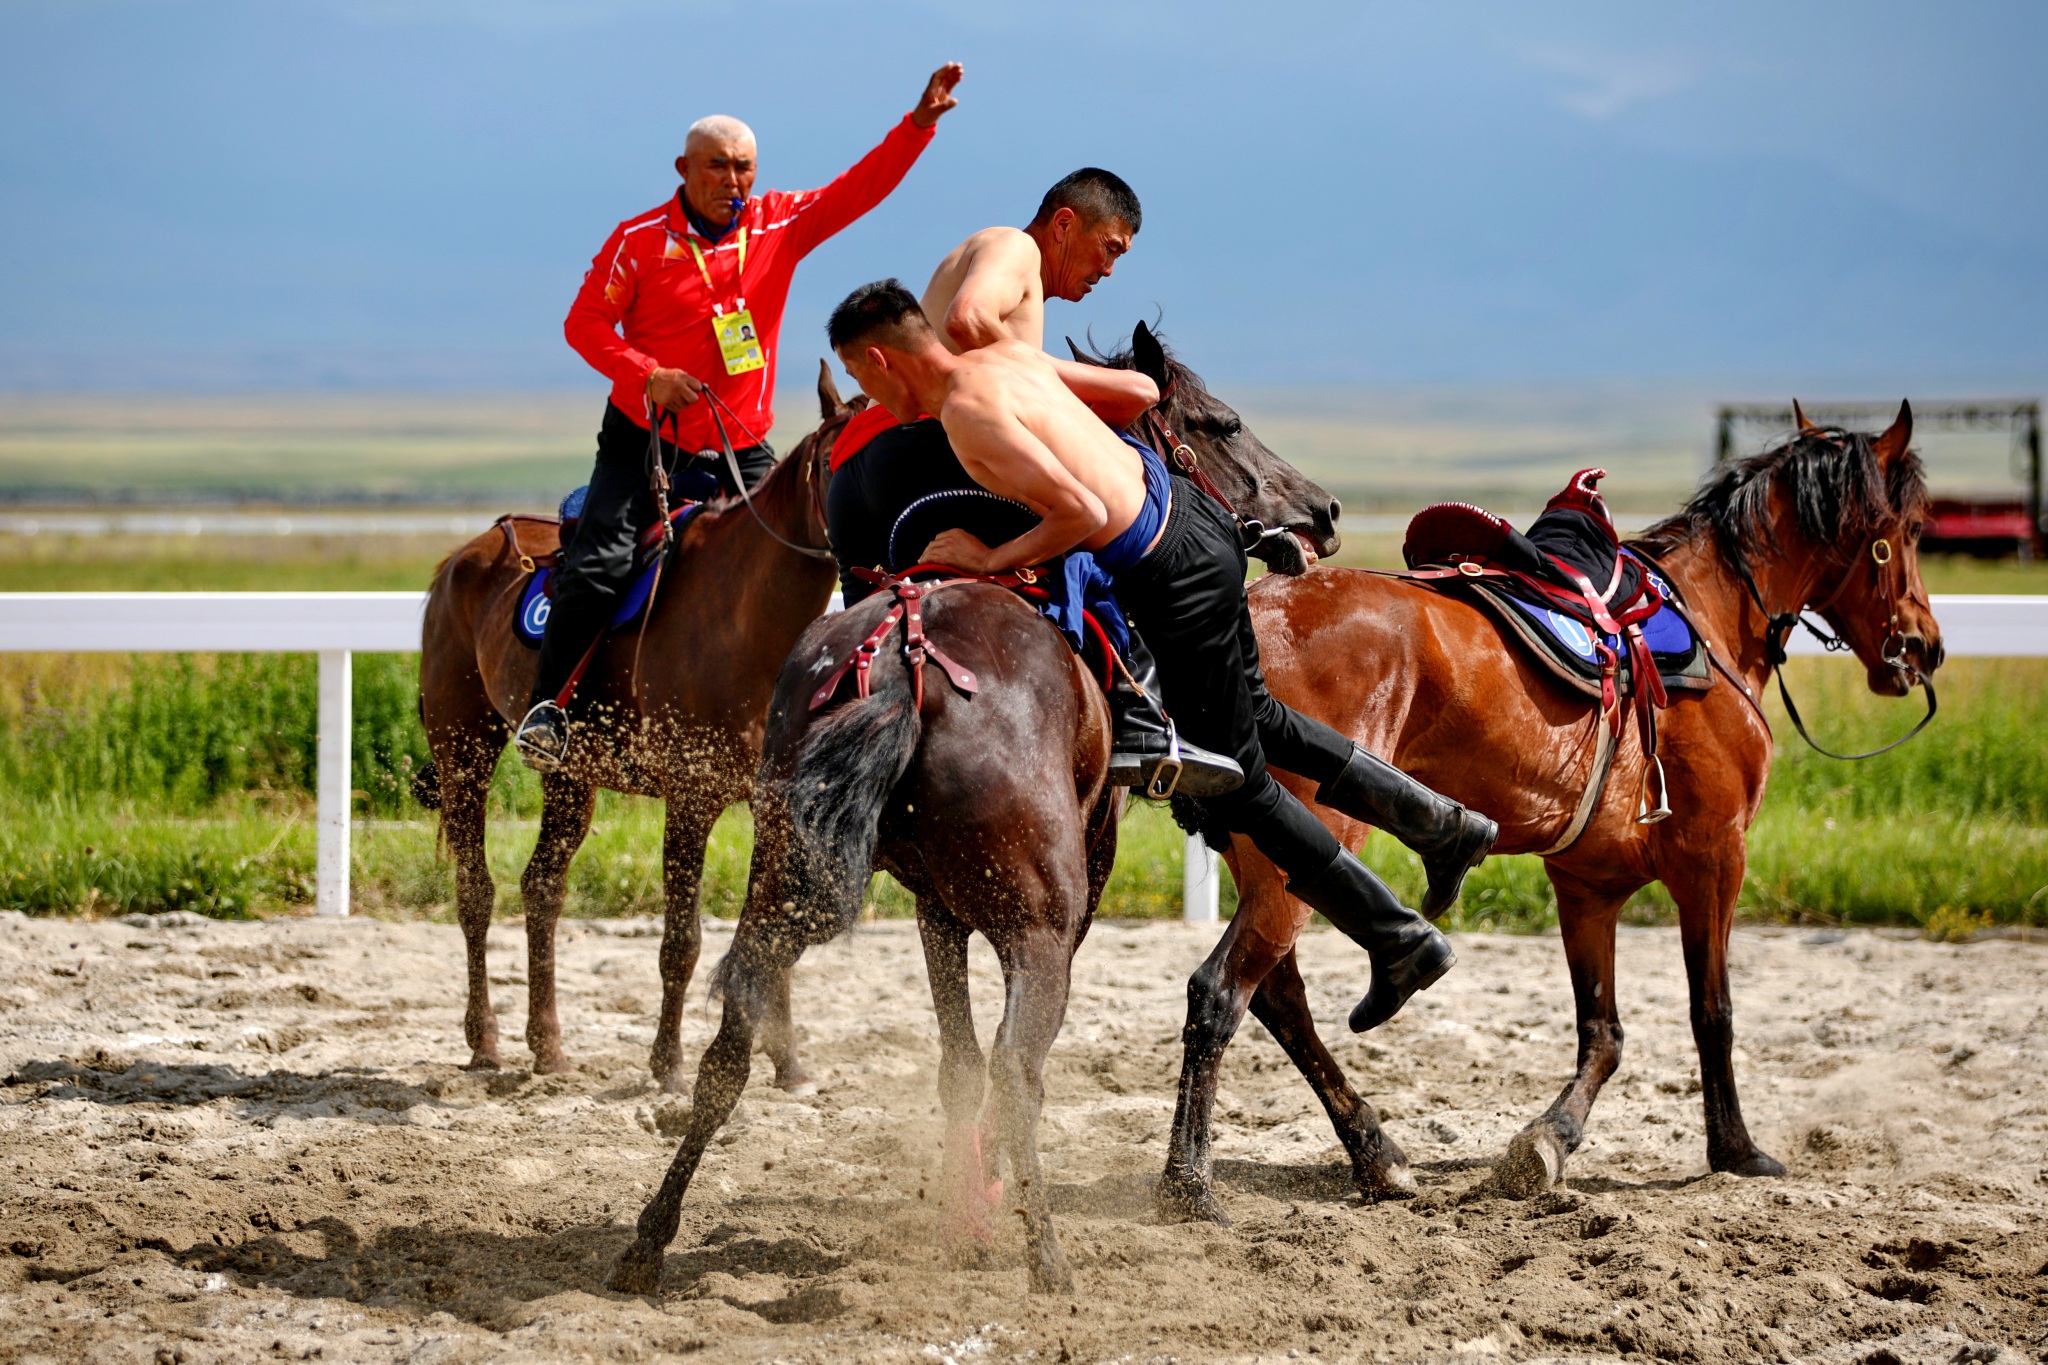 Two men wrestle on horseback during the equestrian events of China's 12th National Traditional Games of Ethnic Minorities held in Xinjiang on July 8, 2024. /CFP